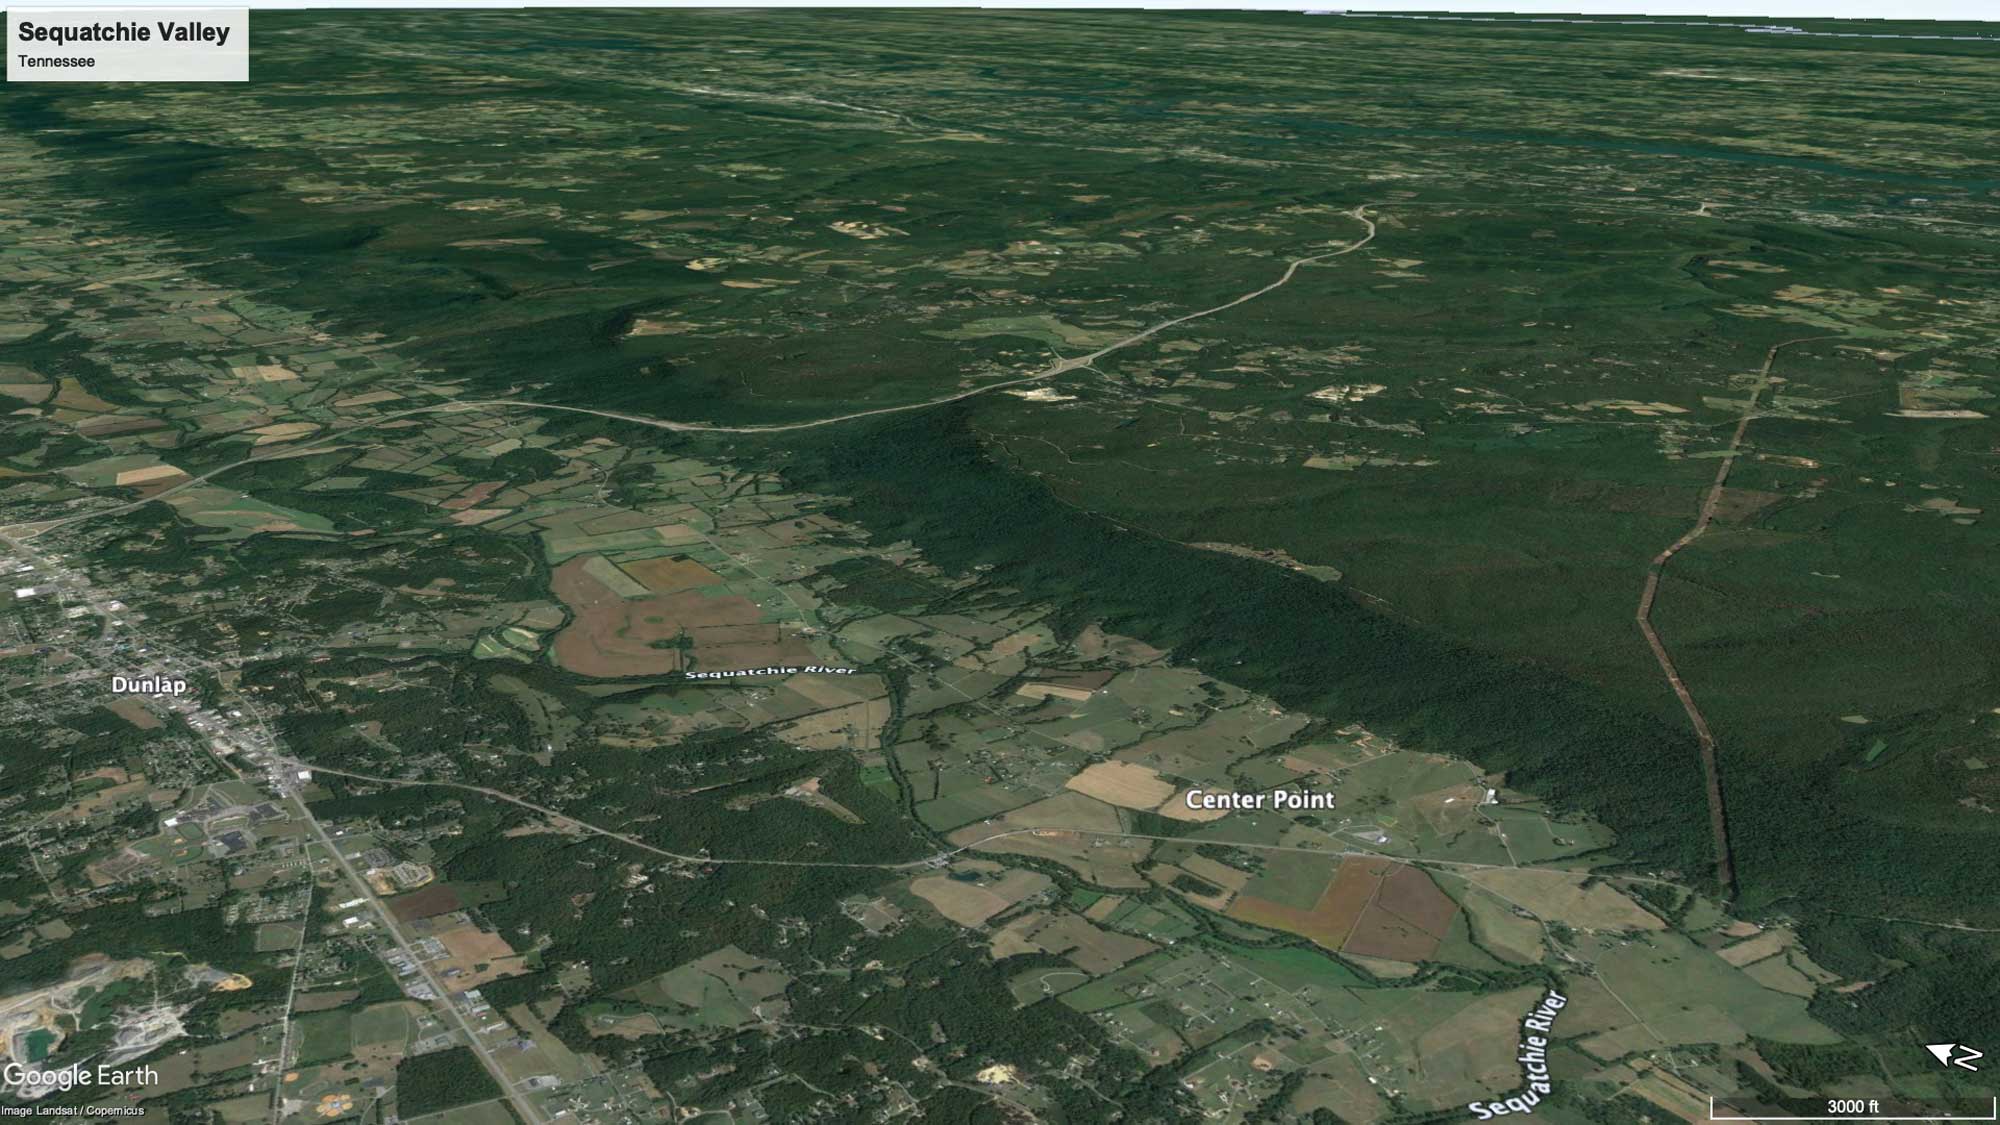 Google Earth satellite image of the Sequatchie Valley in Tennessee.